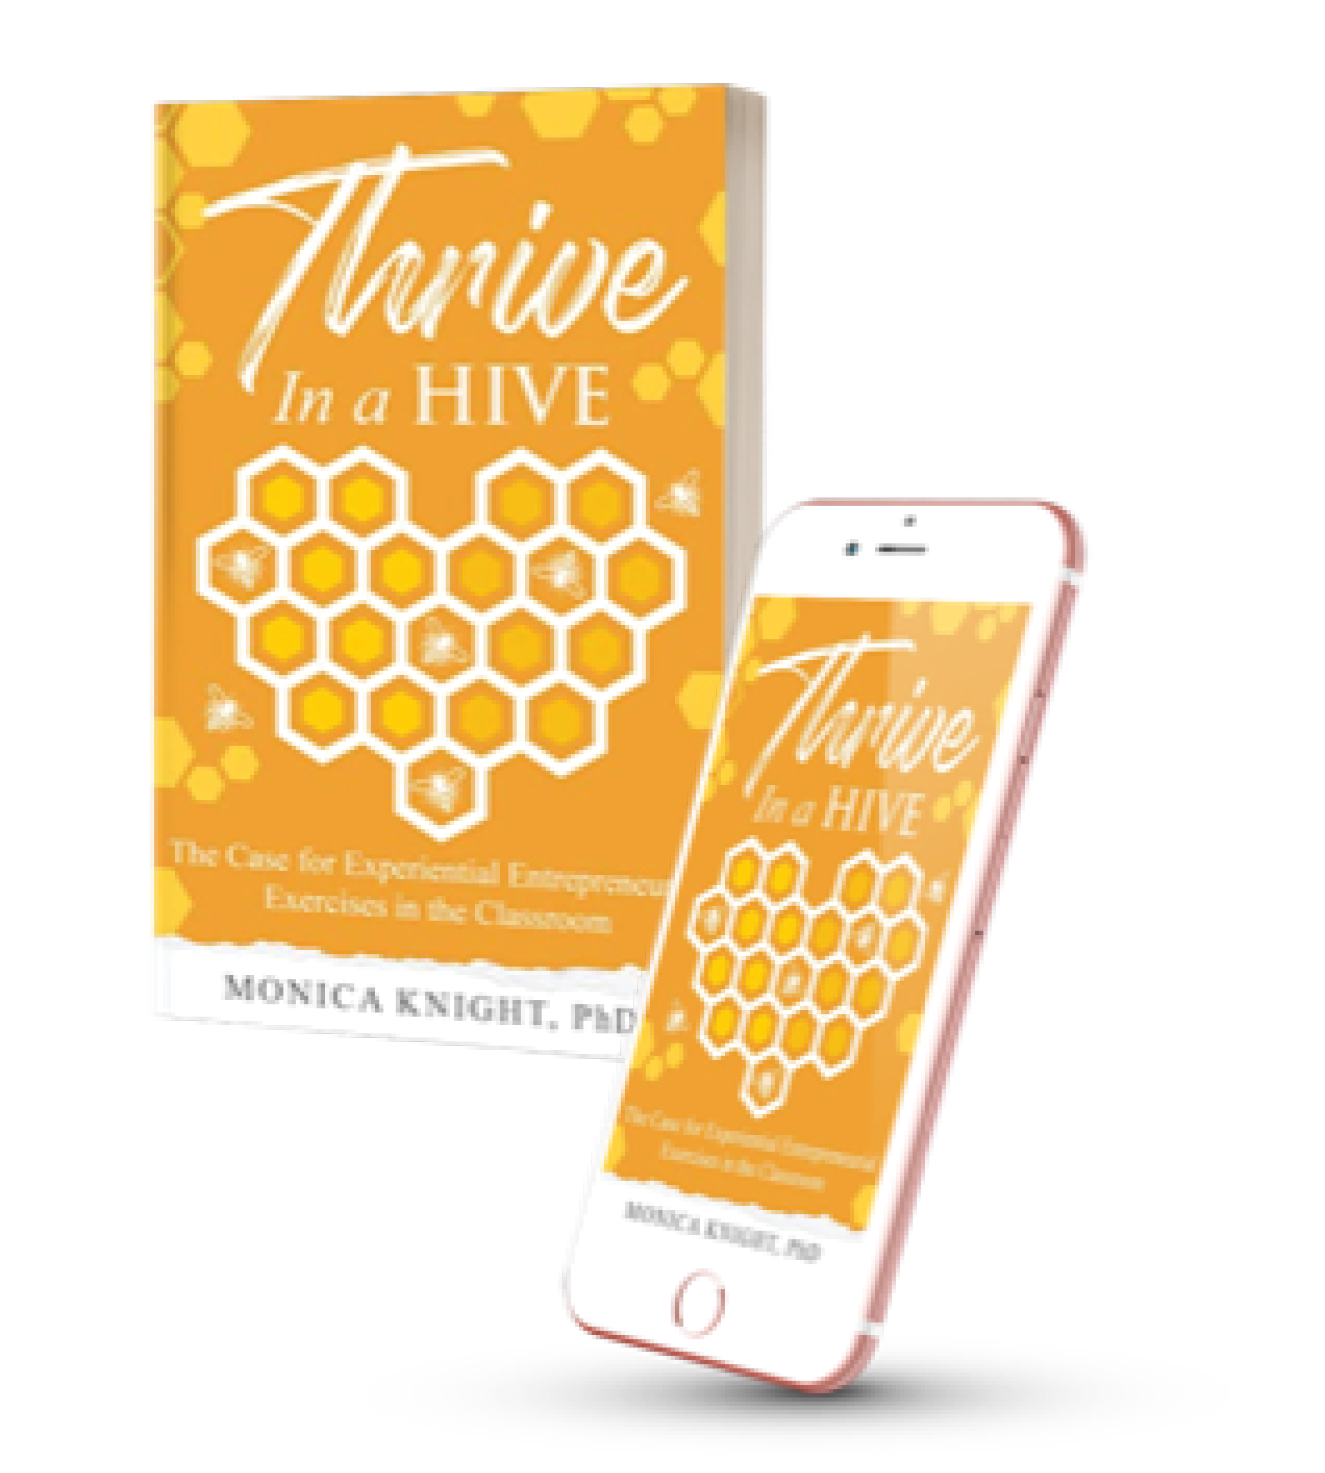 thrive in a hive by monica knight available in paperback and as an ebook